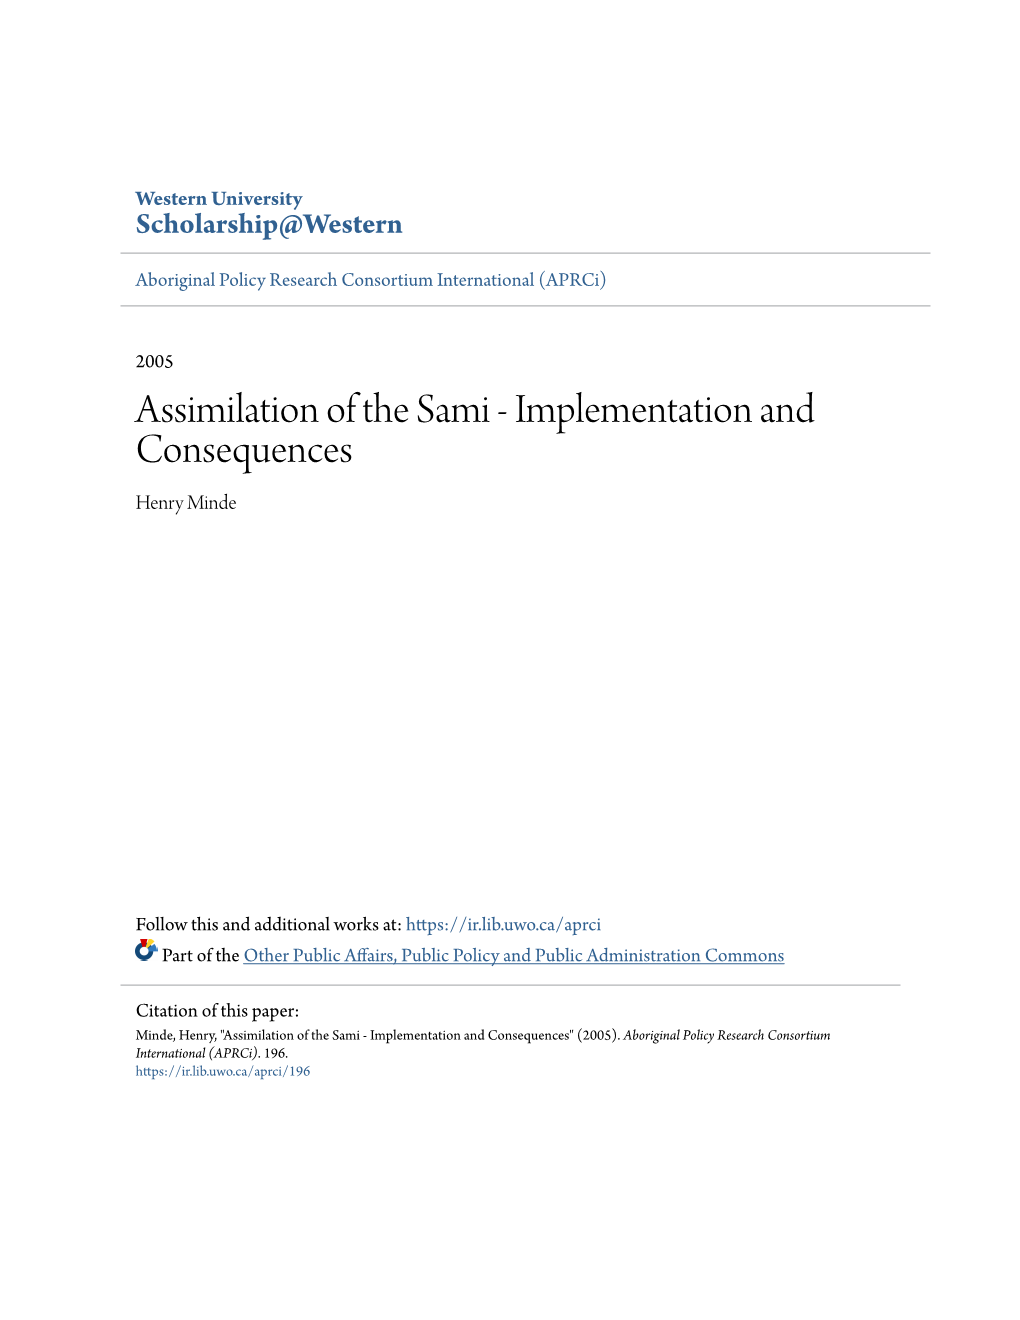 Assimilation of the Sami - Implementation and Consequences Henry Minde